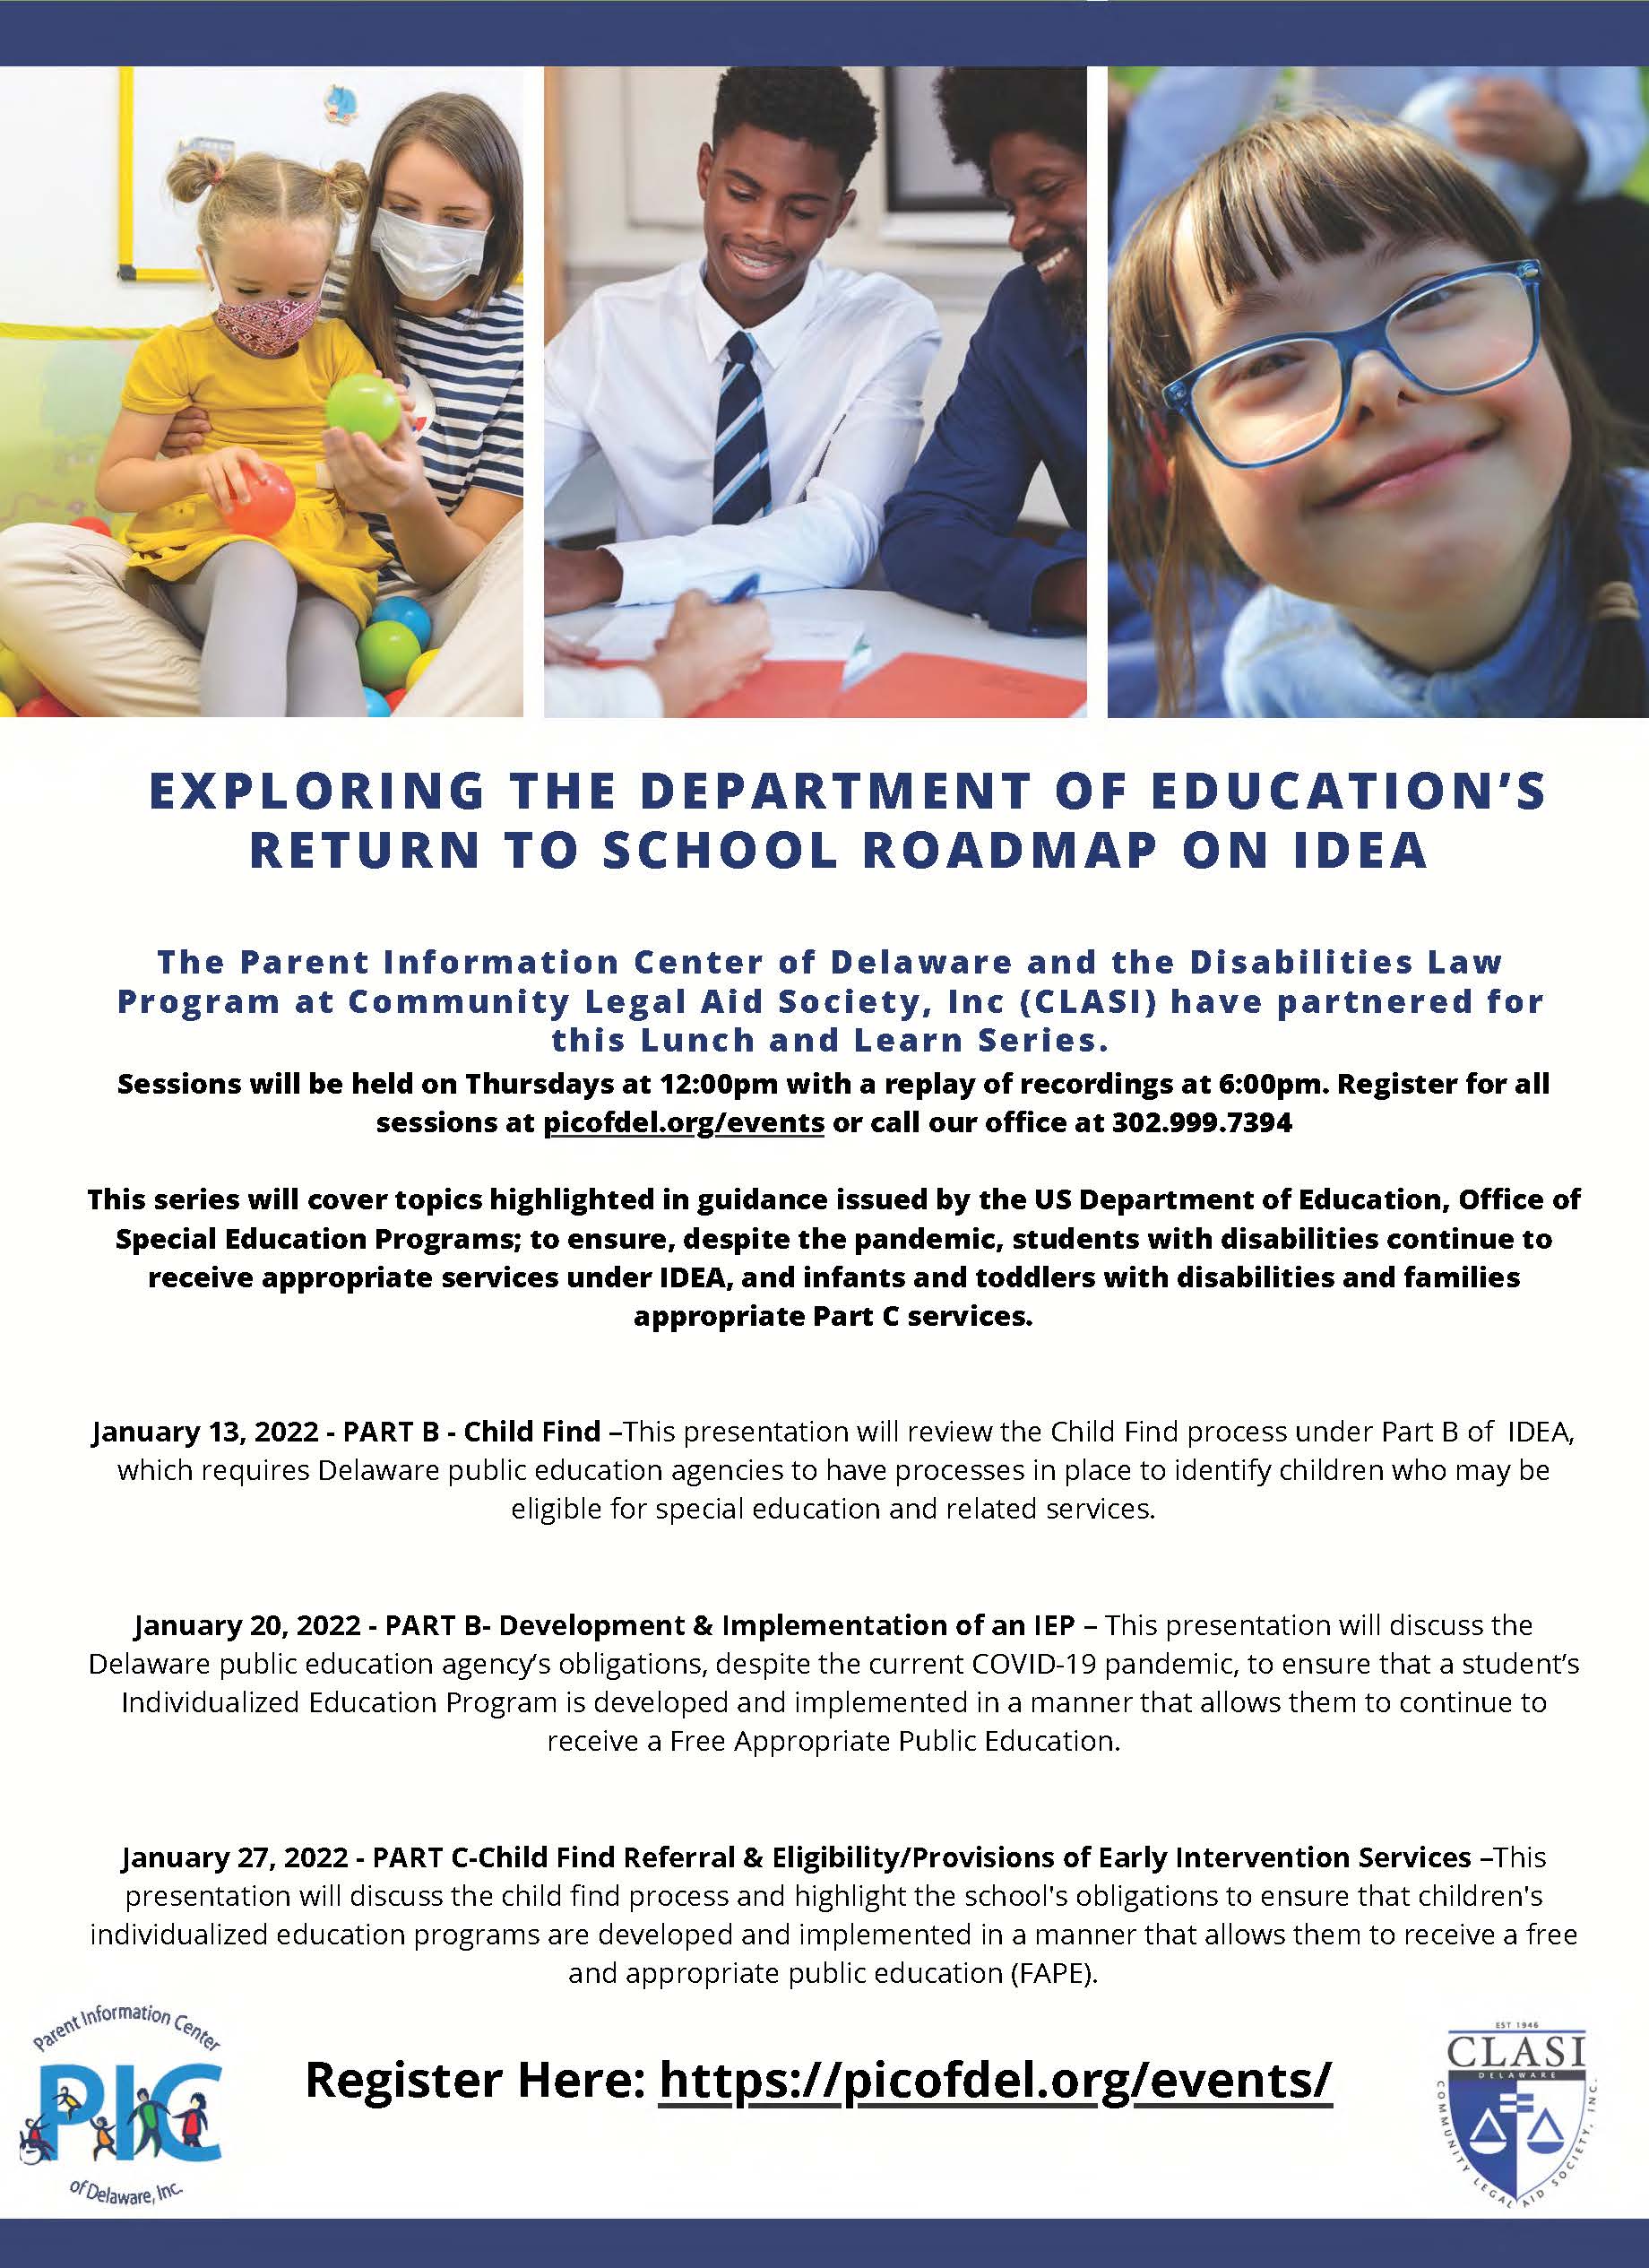 EXPLORING THE DEPARTMENT OF EDUCATION’S RETURN TO SCHOOL ROADMAP ON IDEA